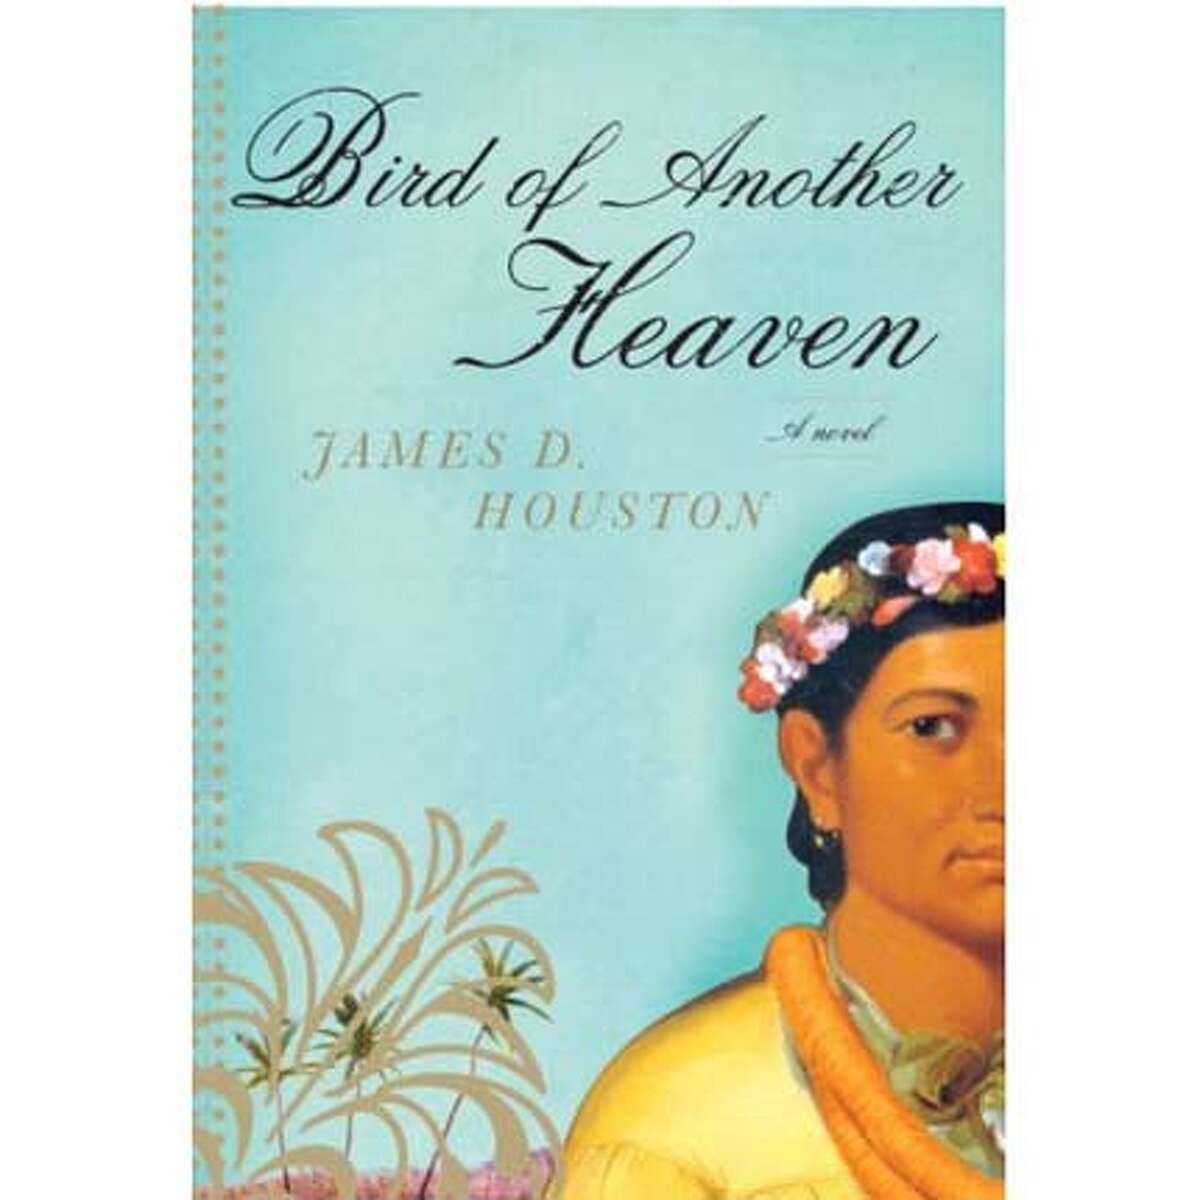 "Bird of Another Heaven" by James D. Houston